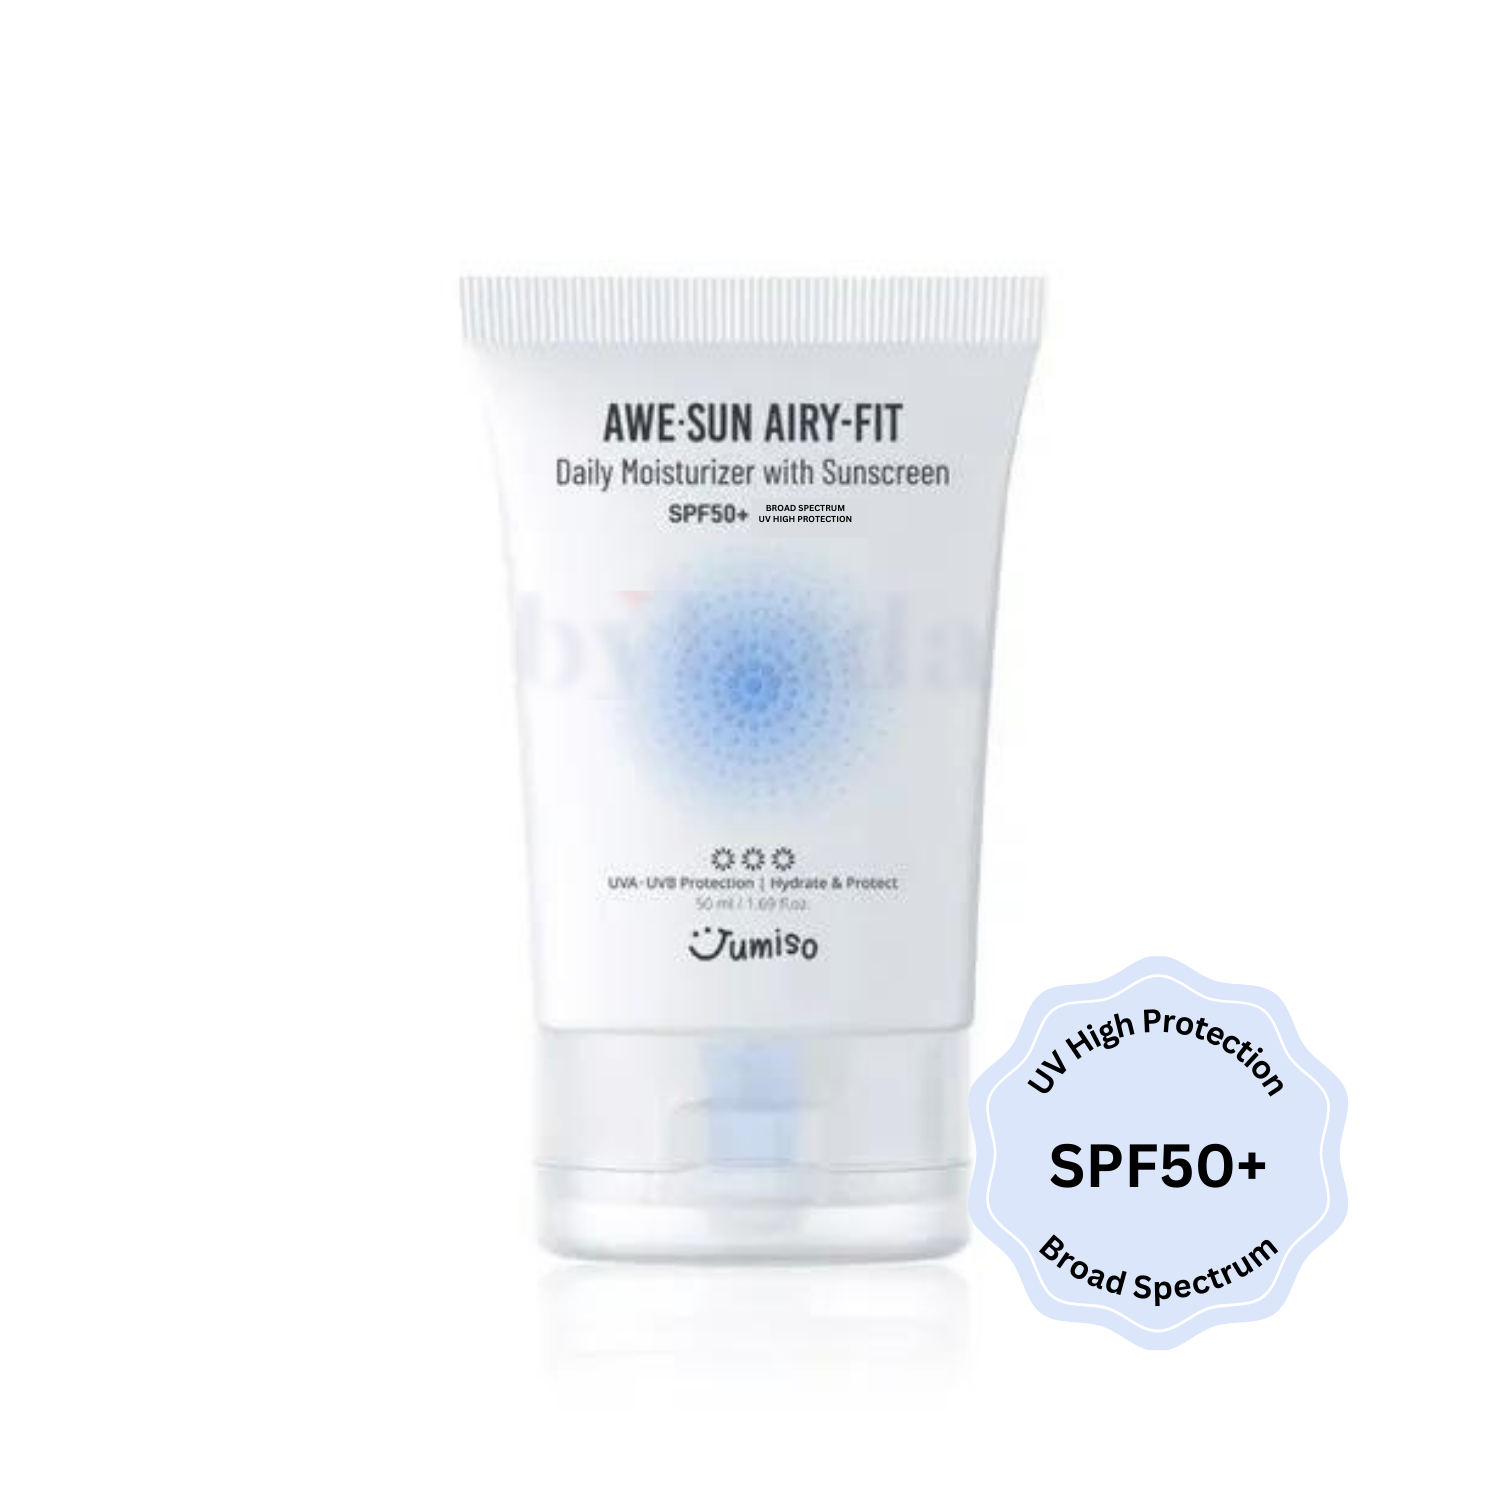 Awe-Sun Airy-fit Daily Moisturizer with Sun Cream SPF50+ Broad Spectrum